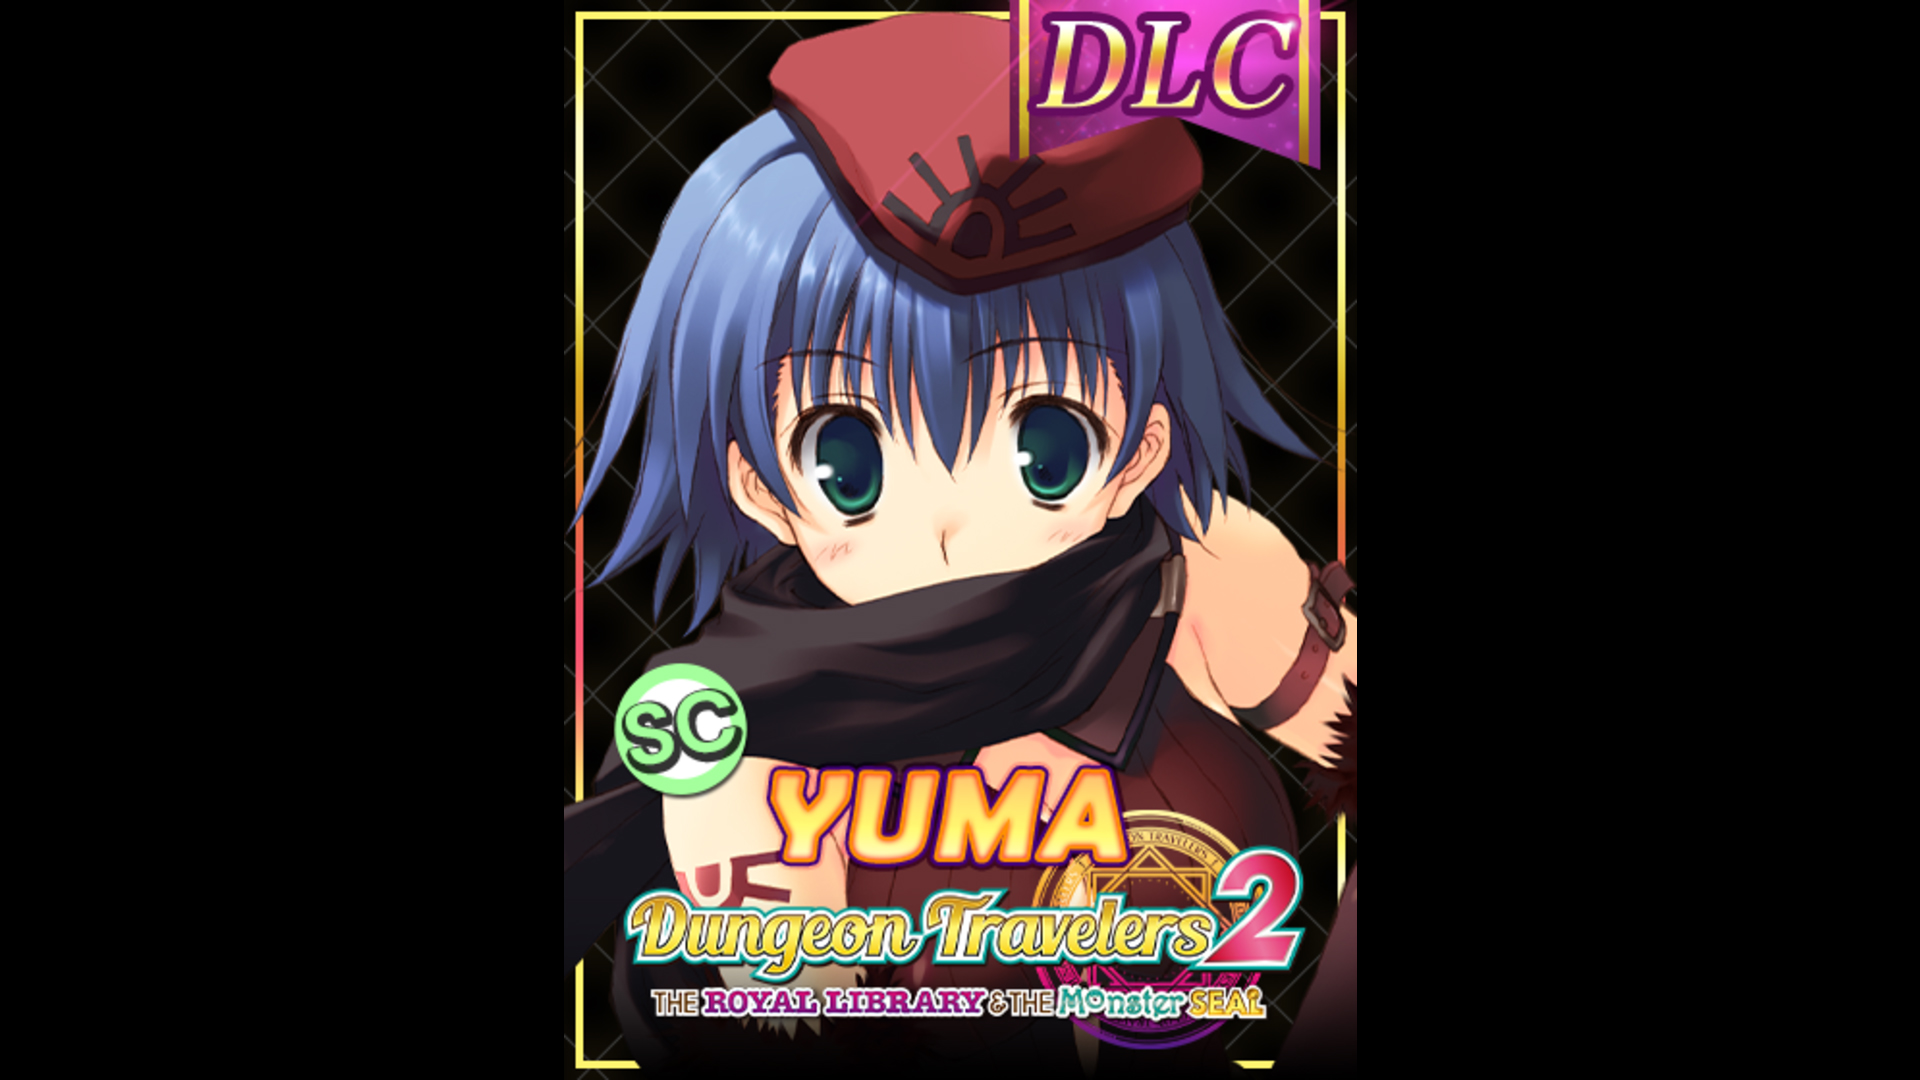 DLC - To Heart 2 Character: Scout Yuma (Dungeon Travelers 2) - RPG - 1